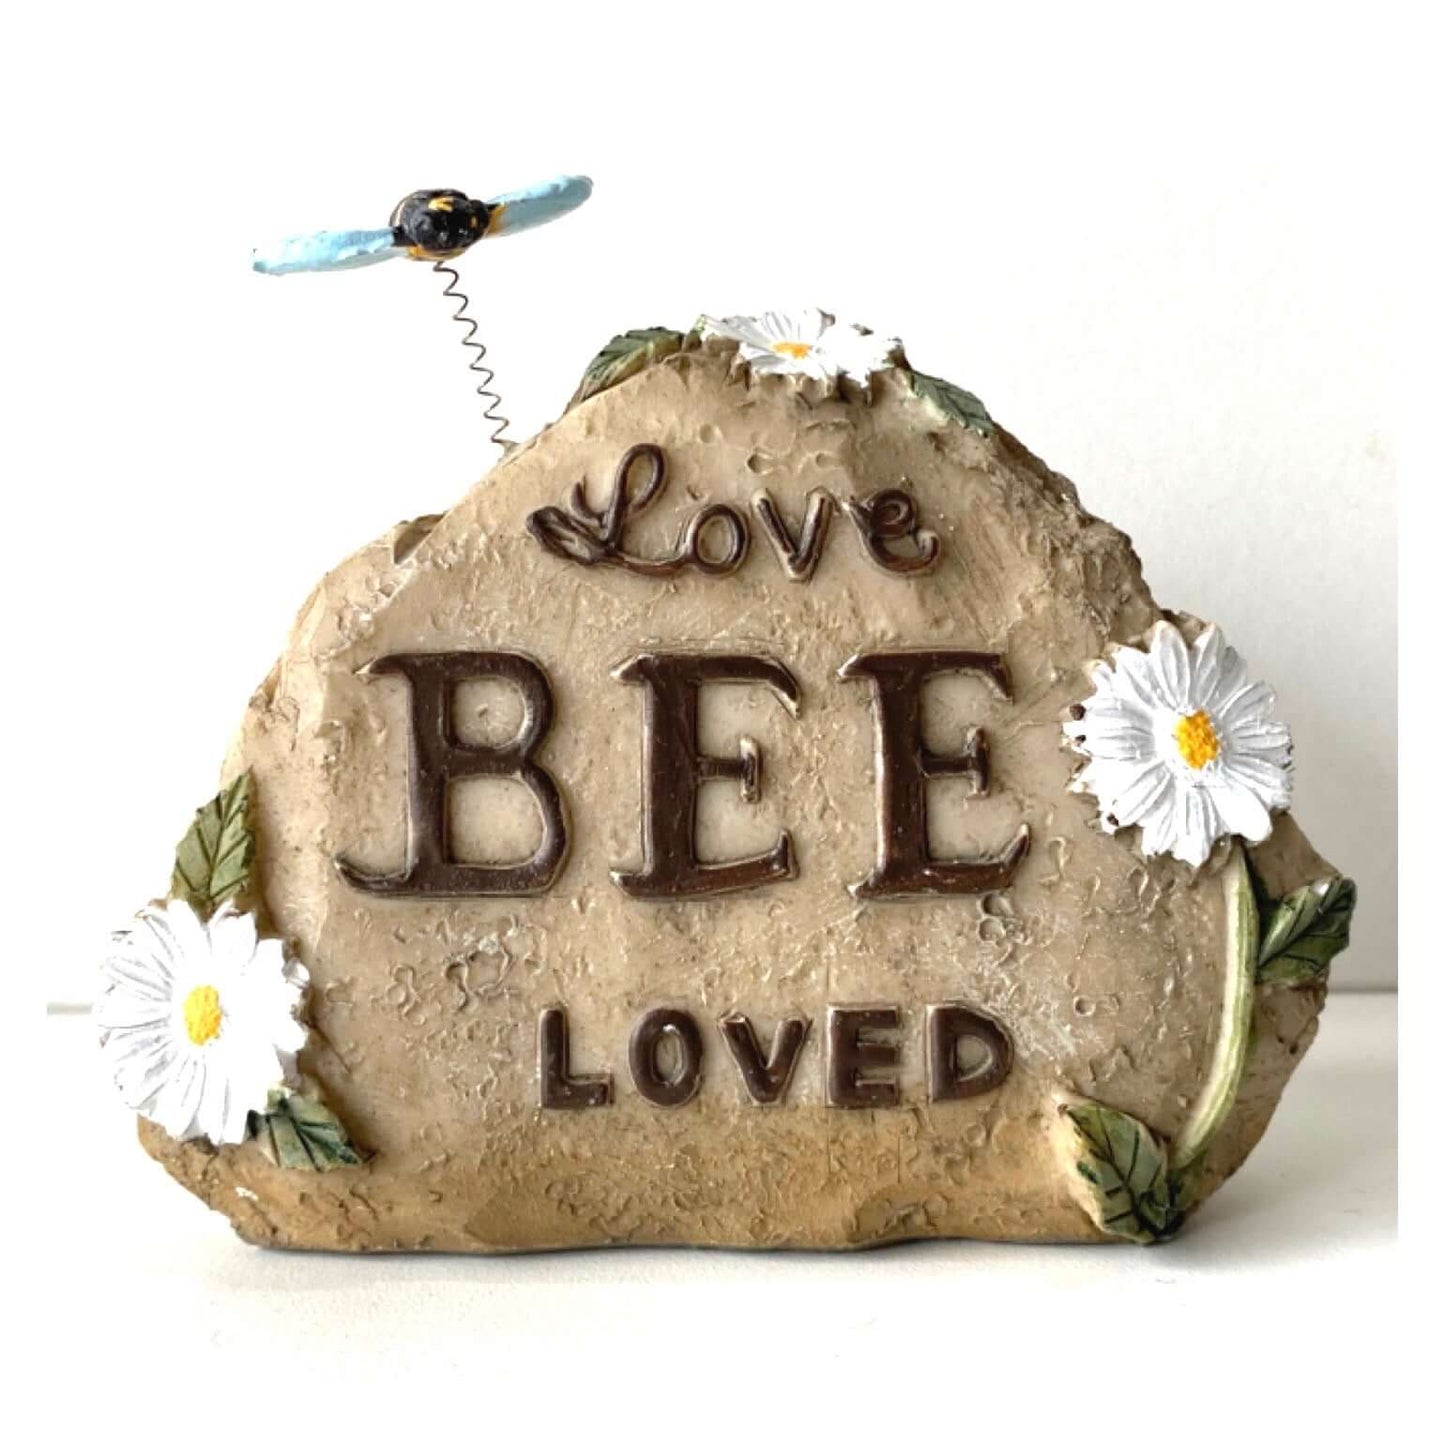 Bee Loved Love Inspirational Garden Ornament - The Renmy Store